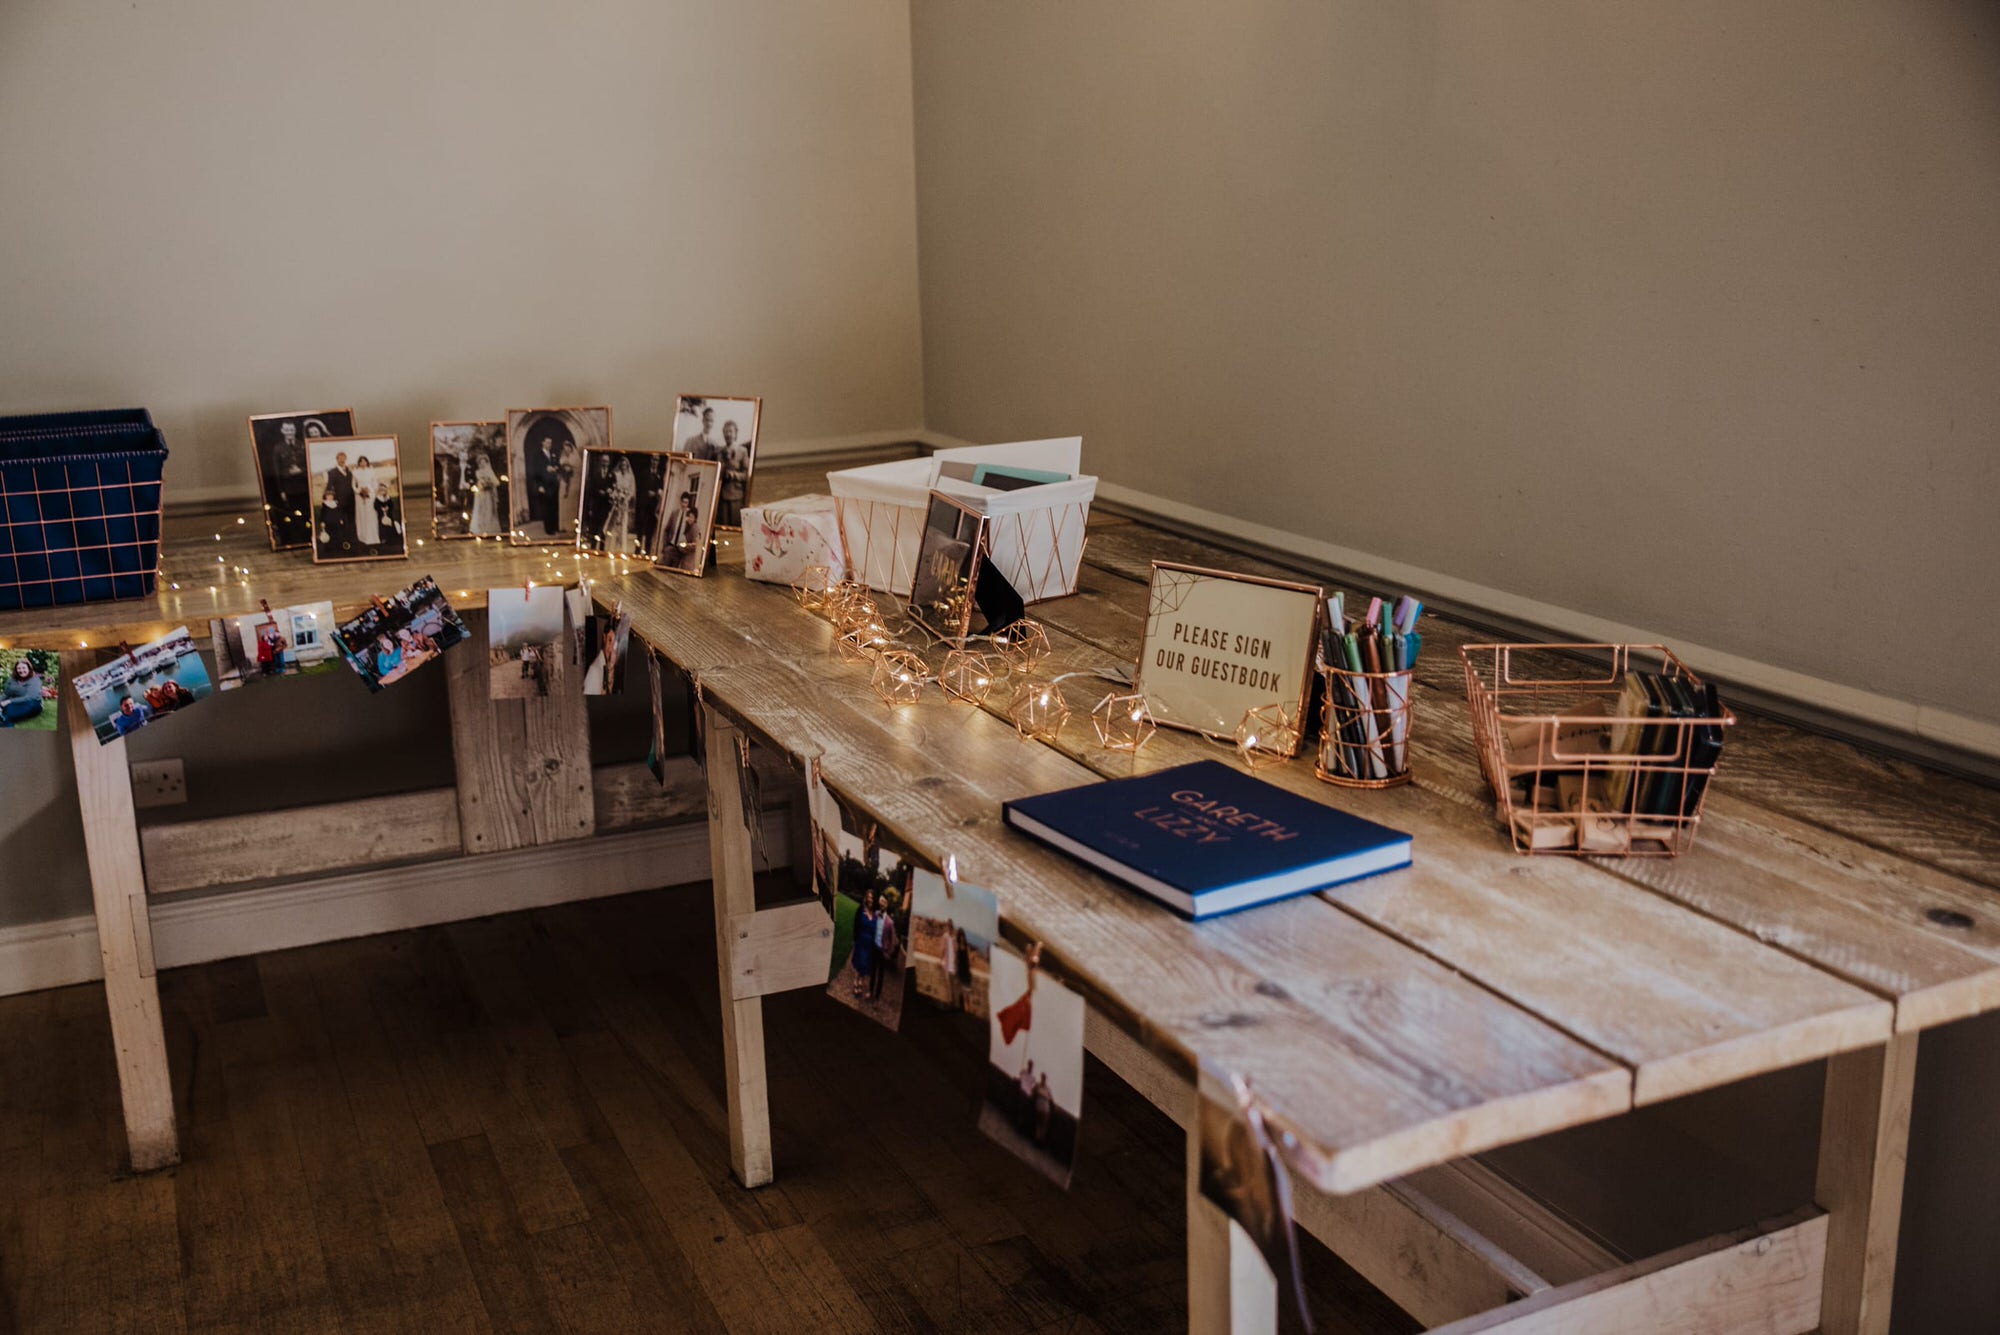 wedding guest book table with famiky photo fromaes on 3 generations and fairy lights Roshni photography The Milling Barn, Bluntswood Hall, Throcking wedding photographer